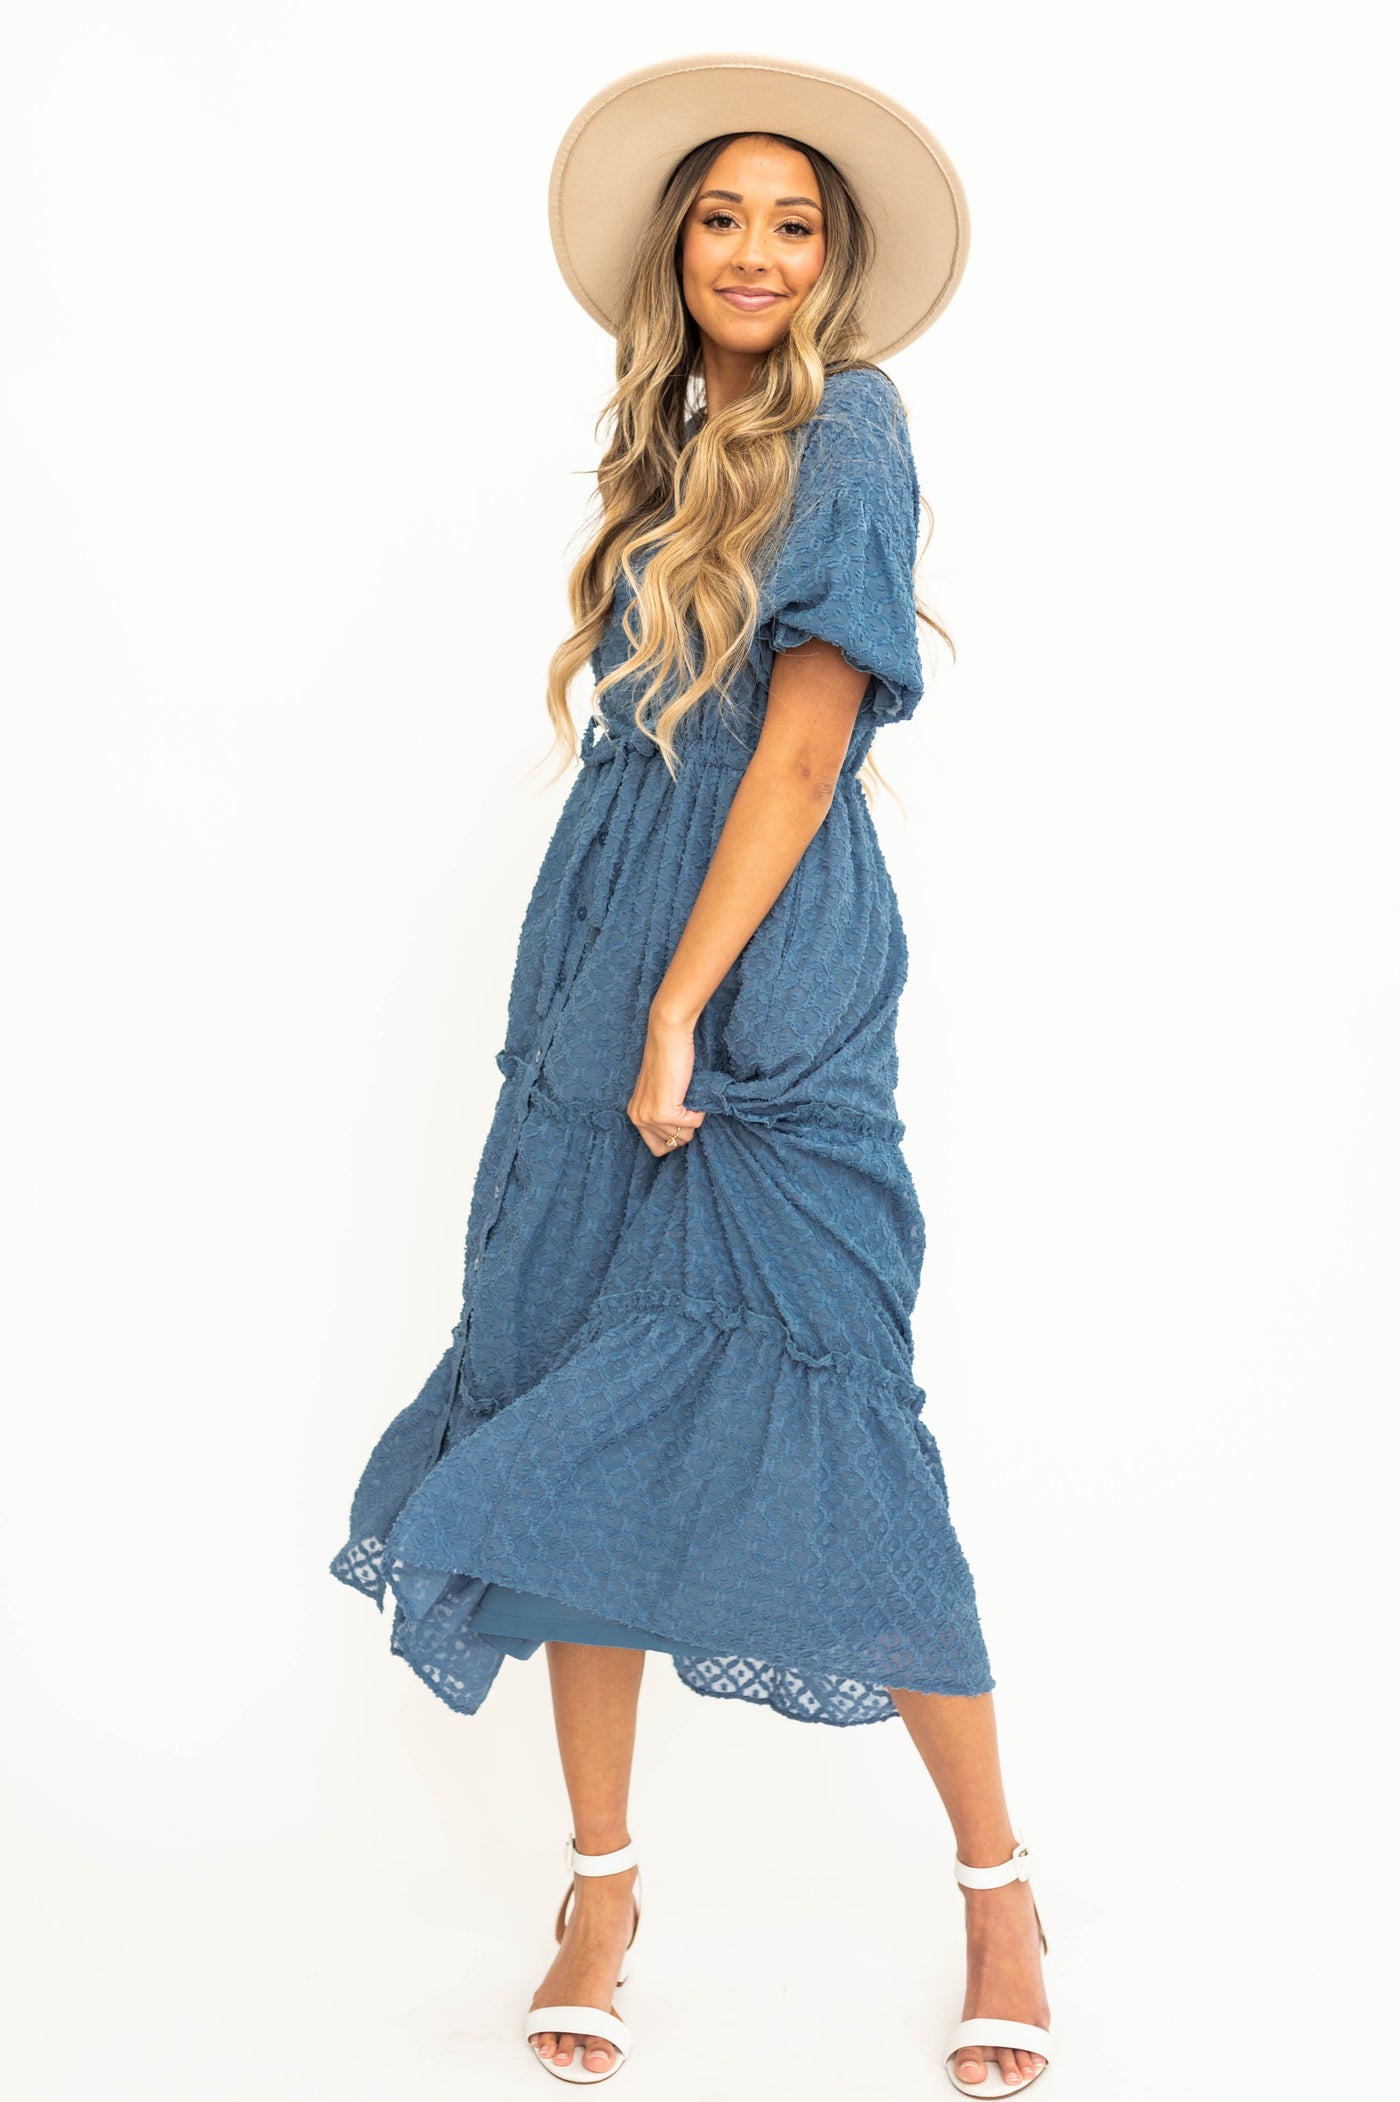 Short sleeve denim blue dress with tiered skirt and ties at the waist